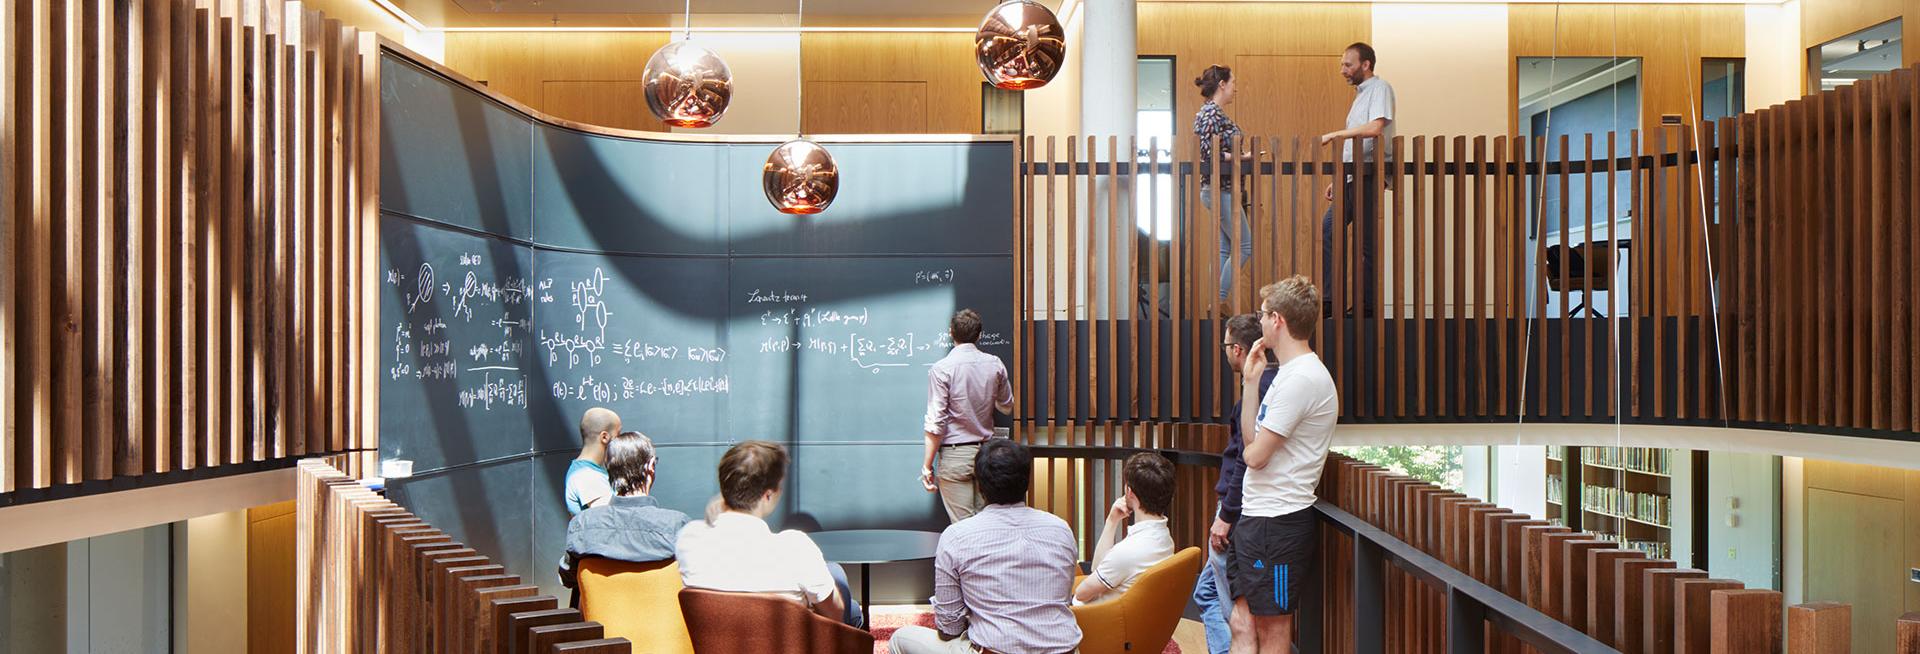 Physicists discussing a problem around a blackboard in the Beecroft building, Department of Physics